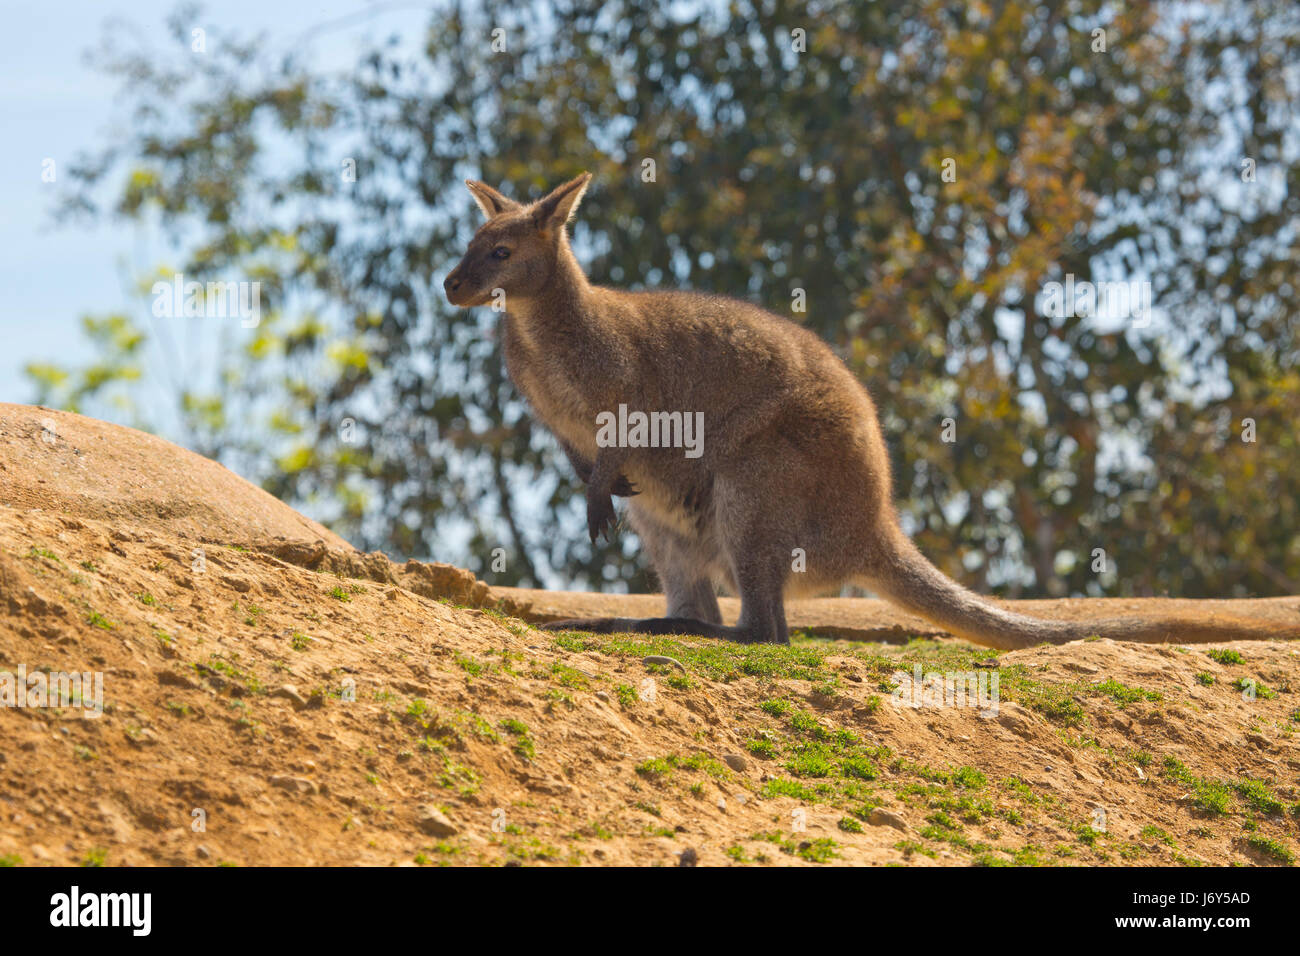 An australian wallaby sitting on a rock with trees in the background Stock Photo